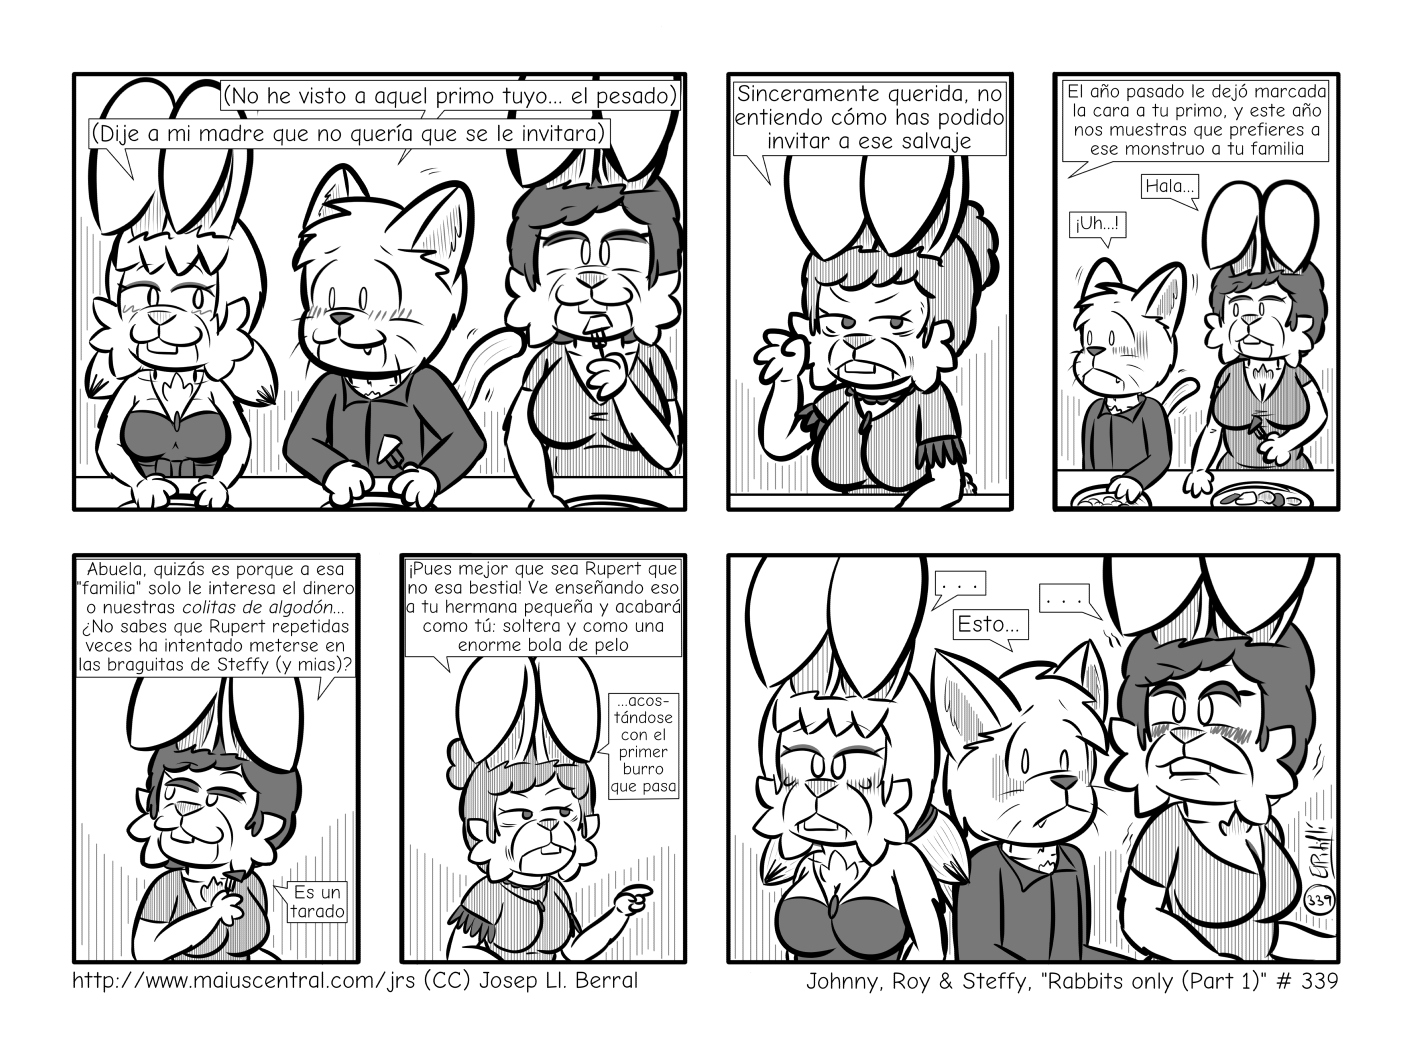 Rabbits only (Part 1)